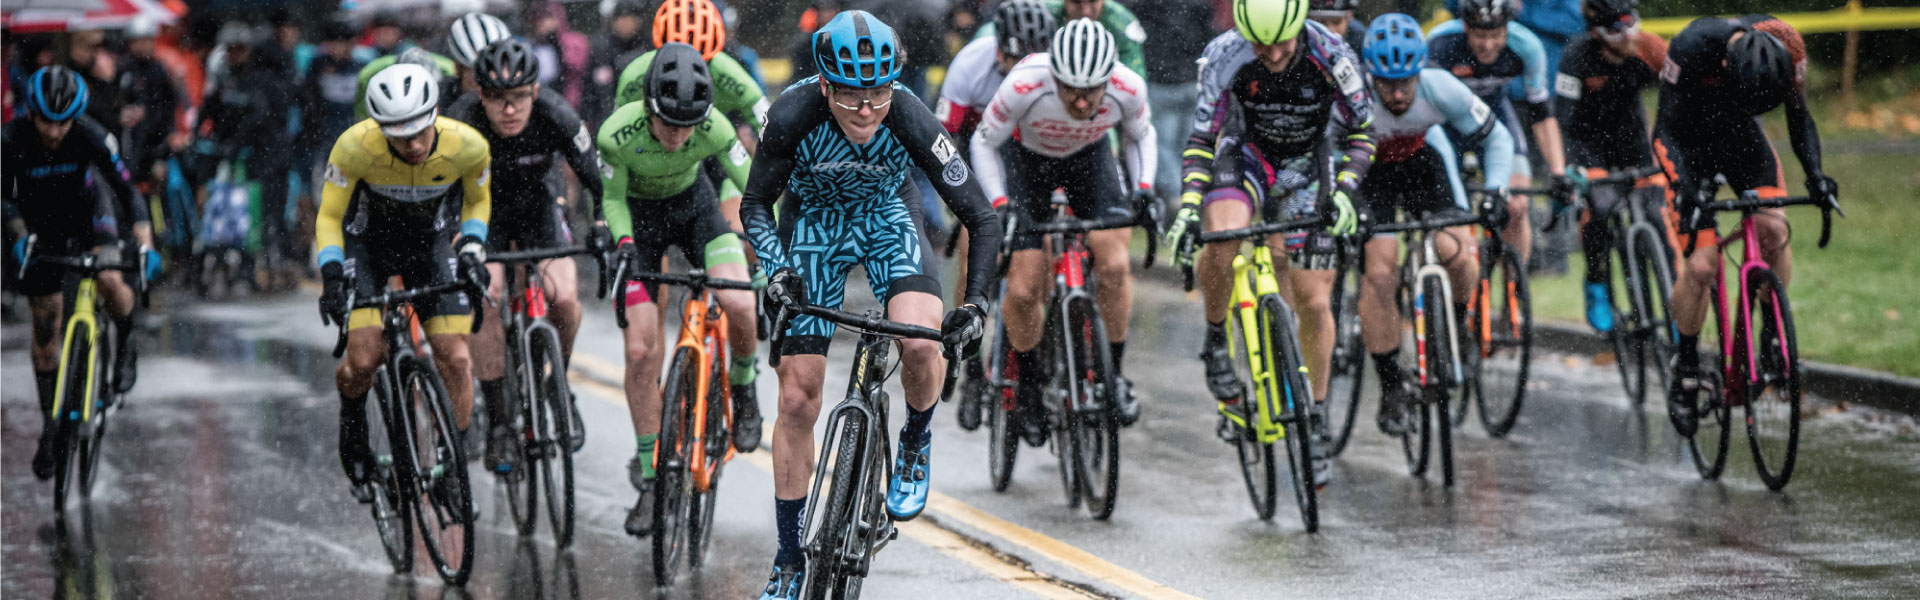 Pocket Rocket chases Cyclocross Dream | Giant Bicycles Canada